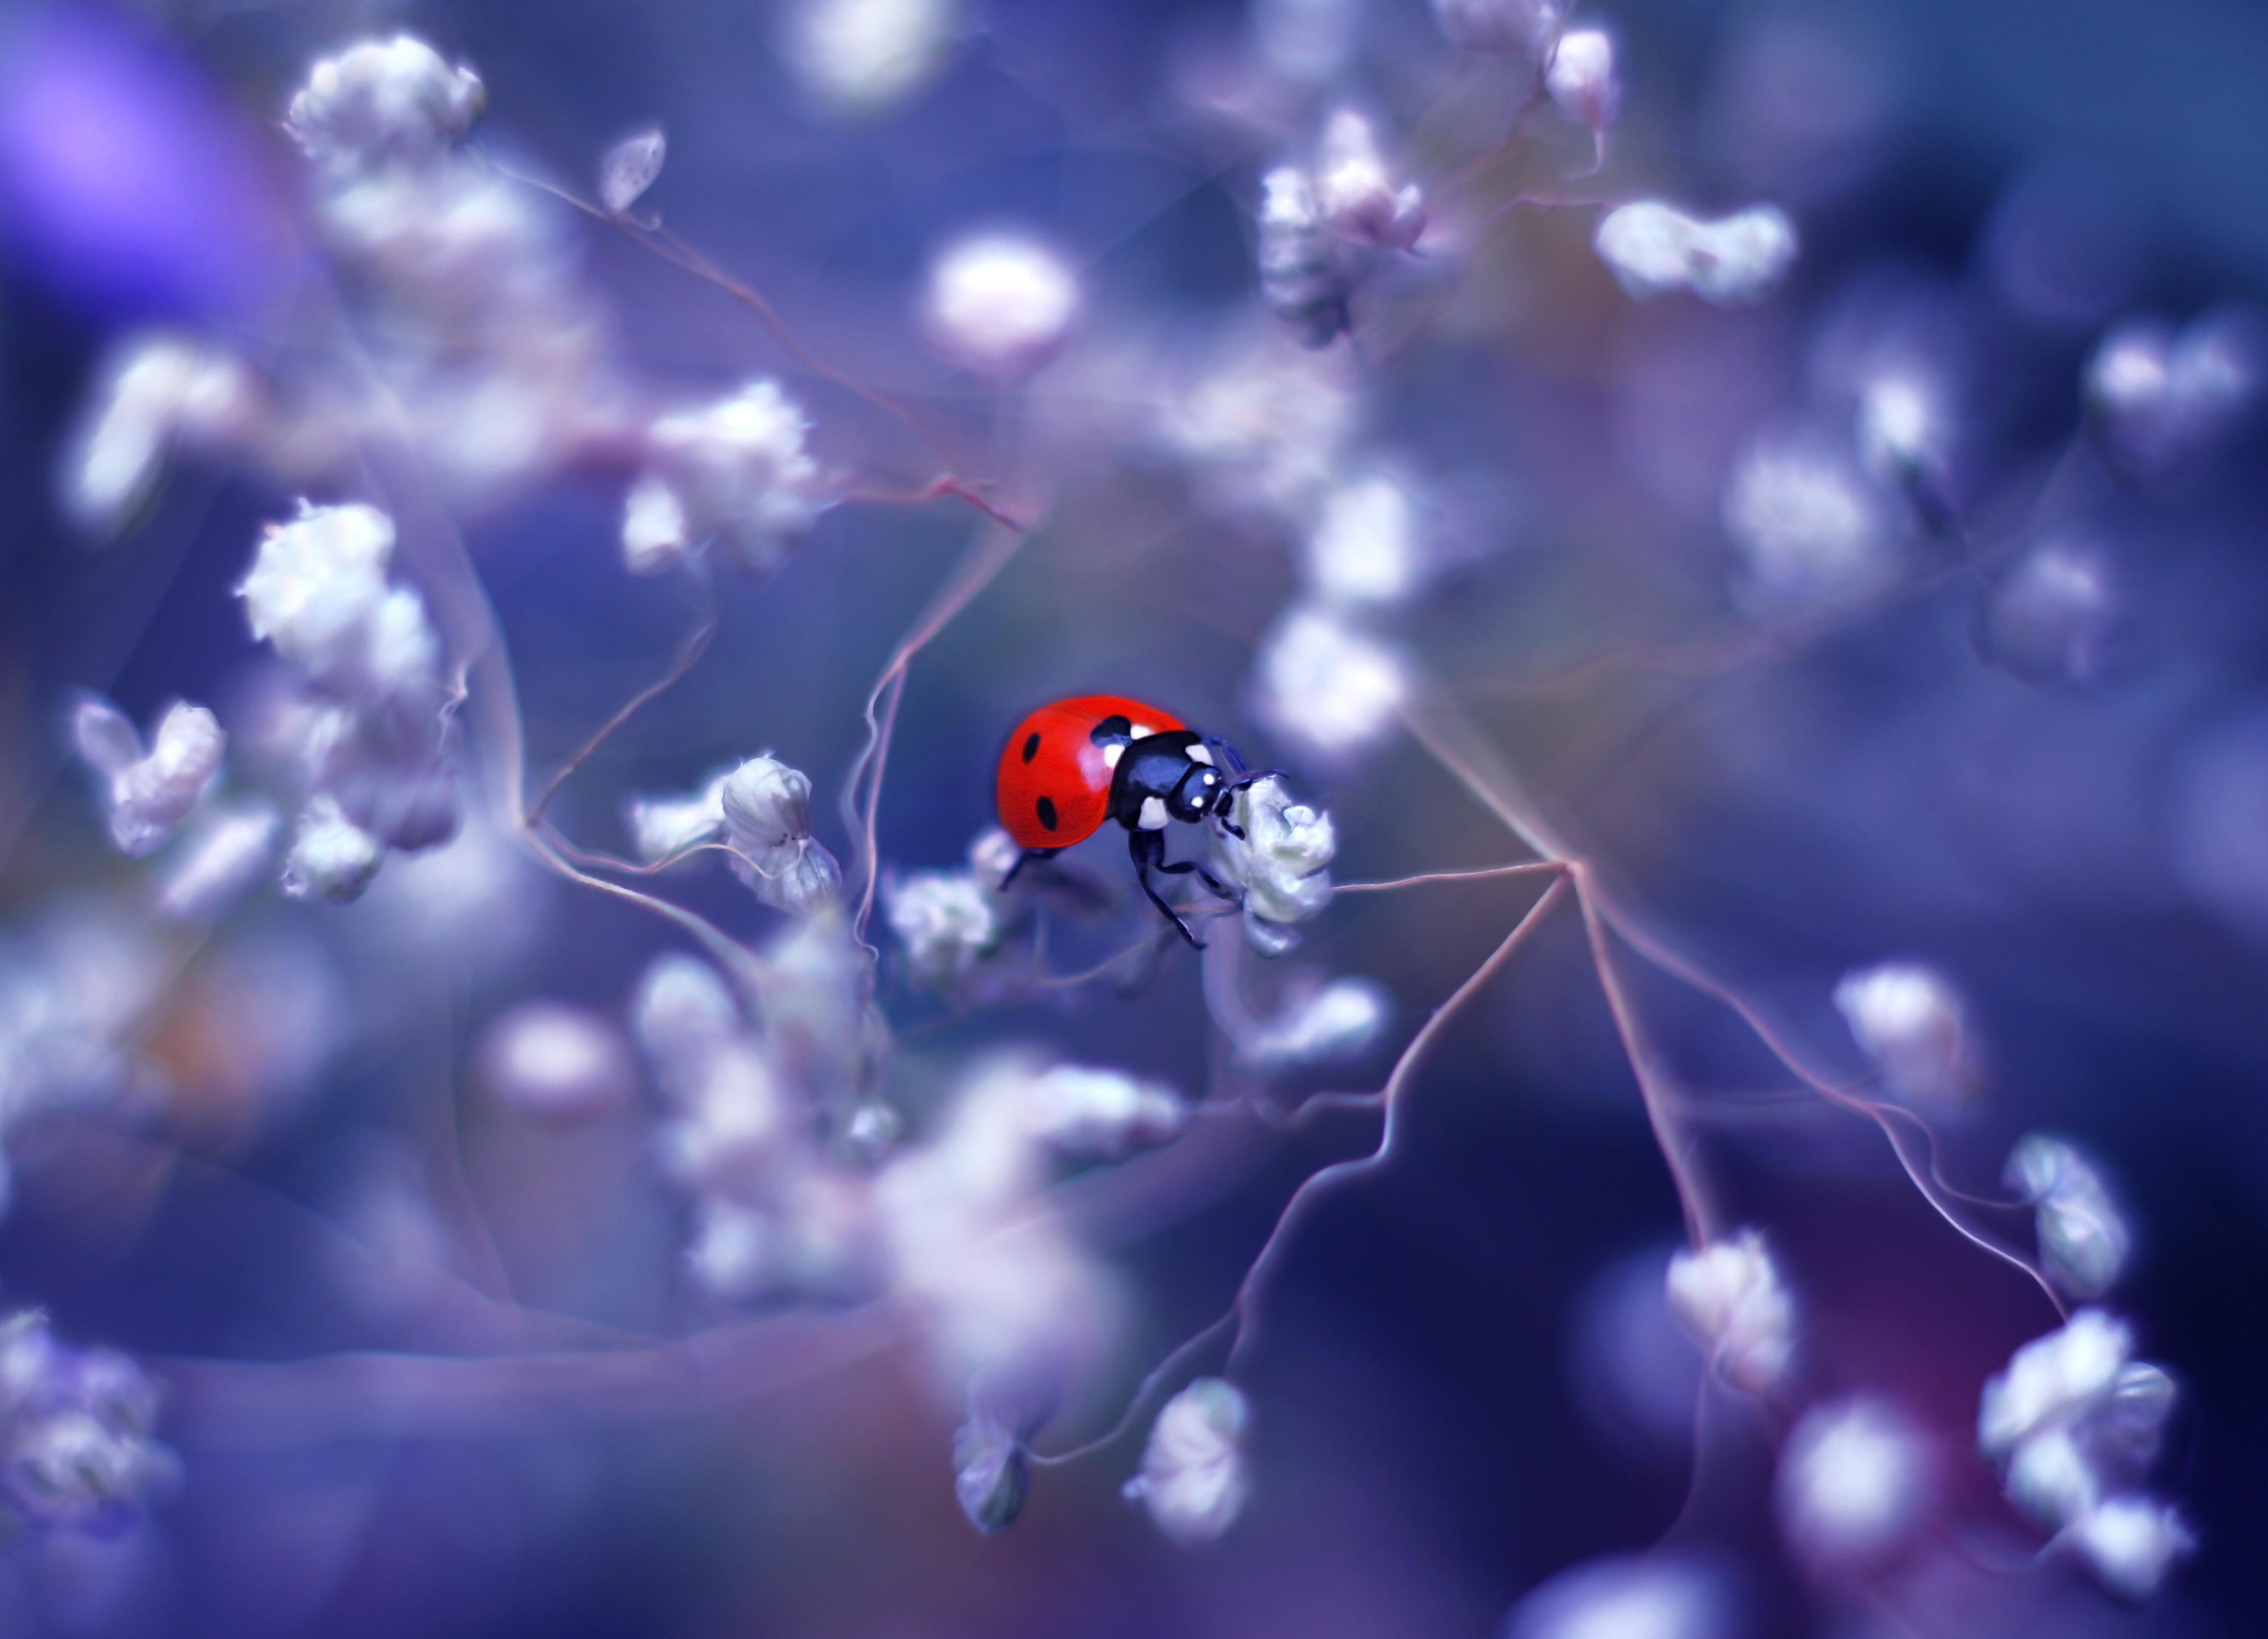 Wallpapers ladybug flower insects on a flower on the desktop